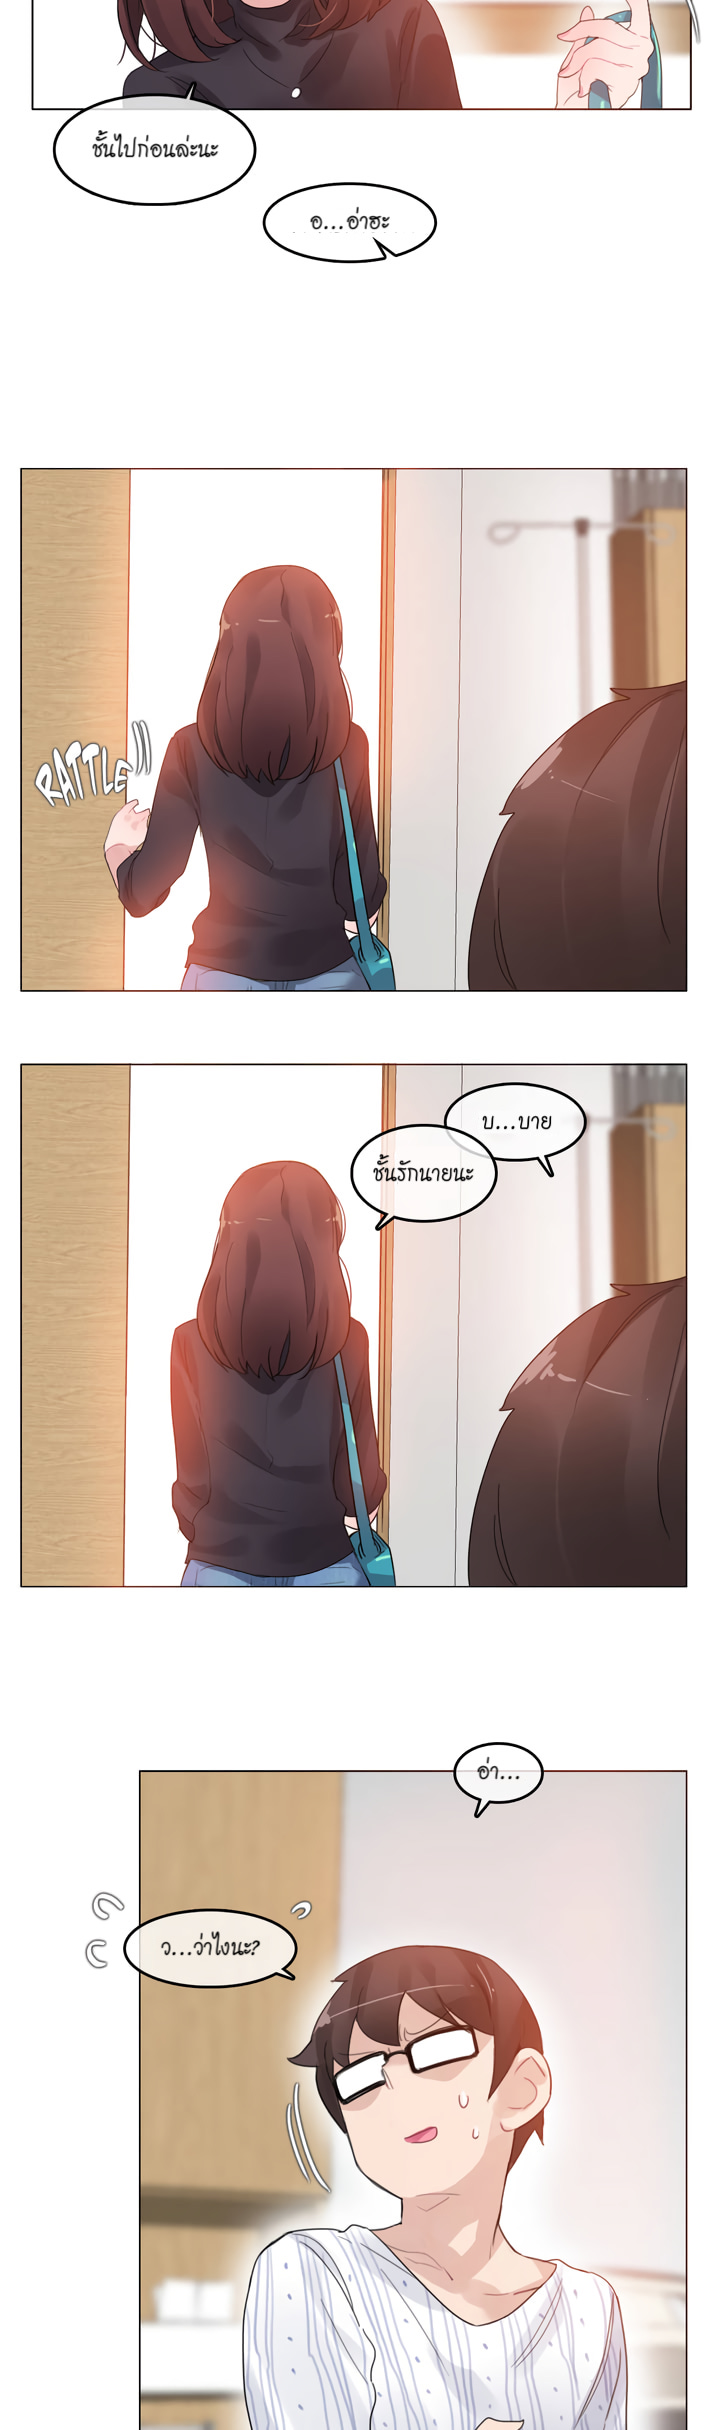 A Pervert’s Daily Life51 (20)